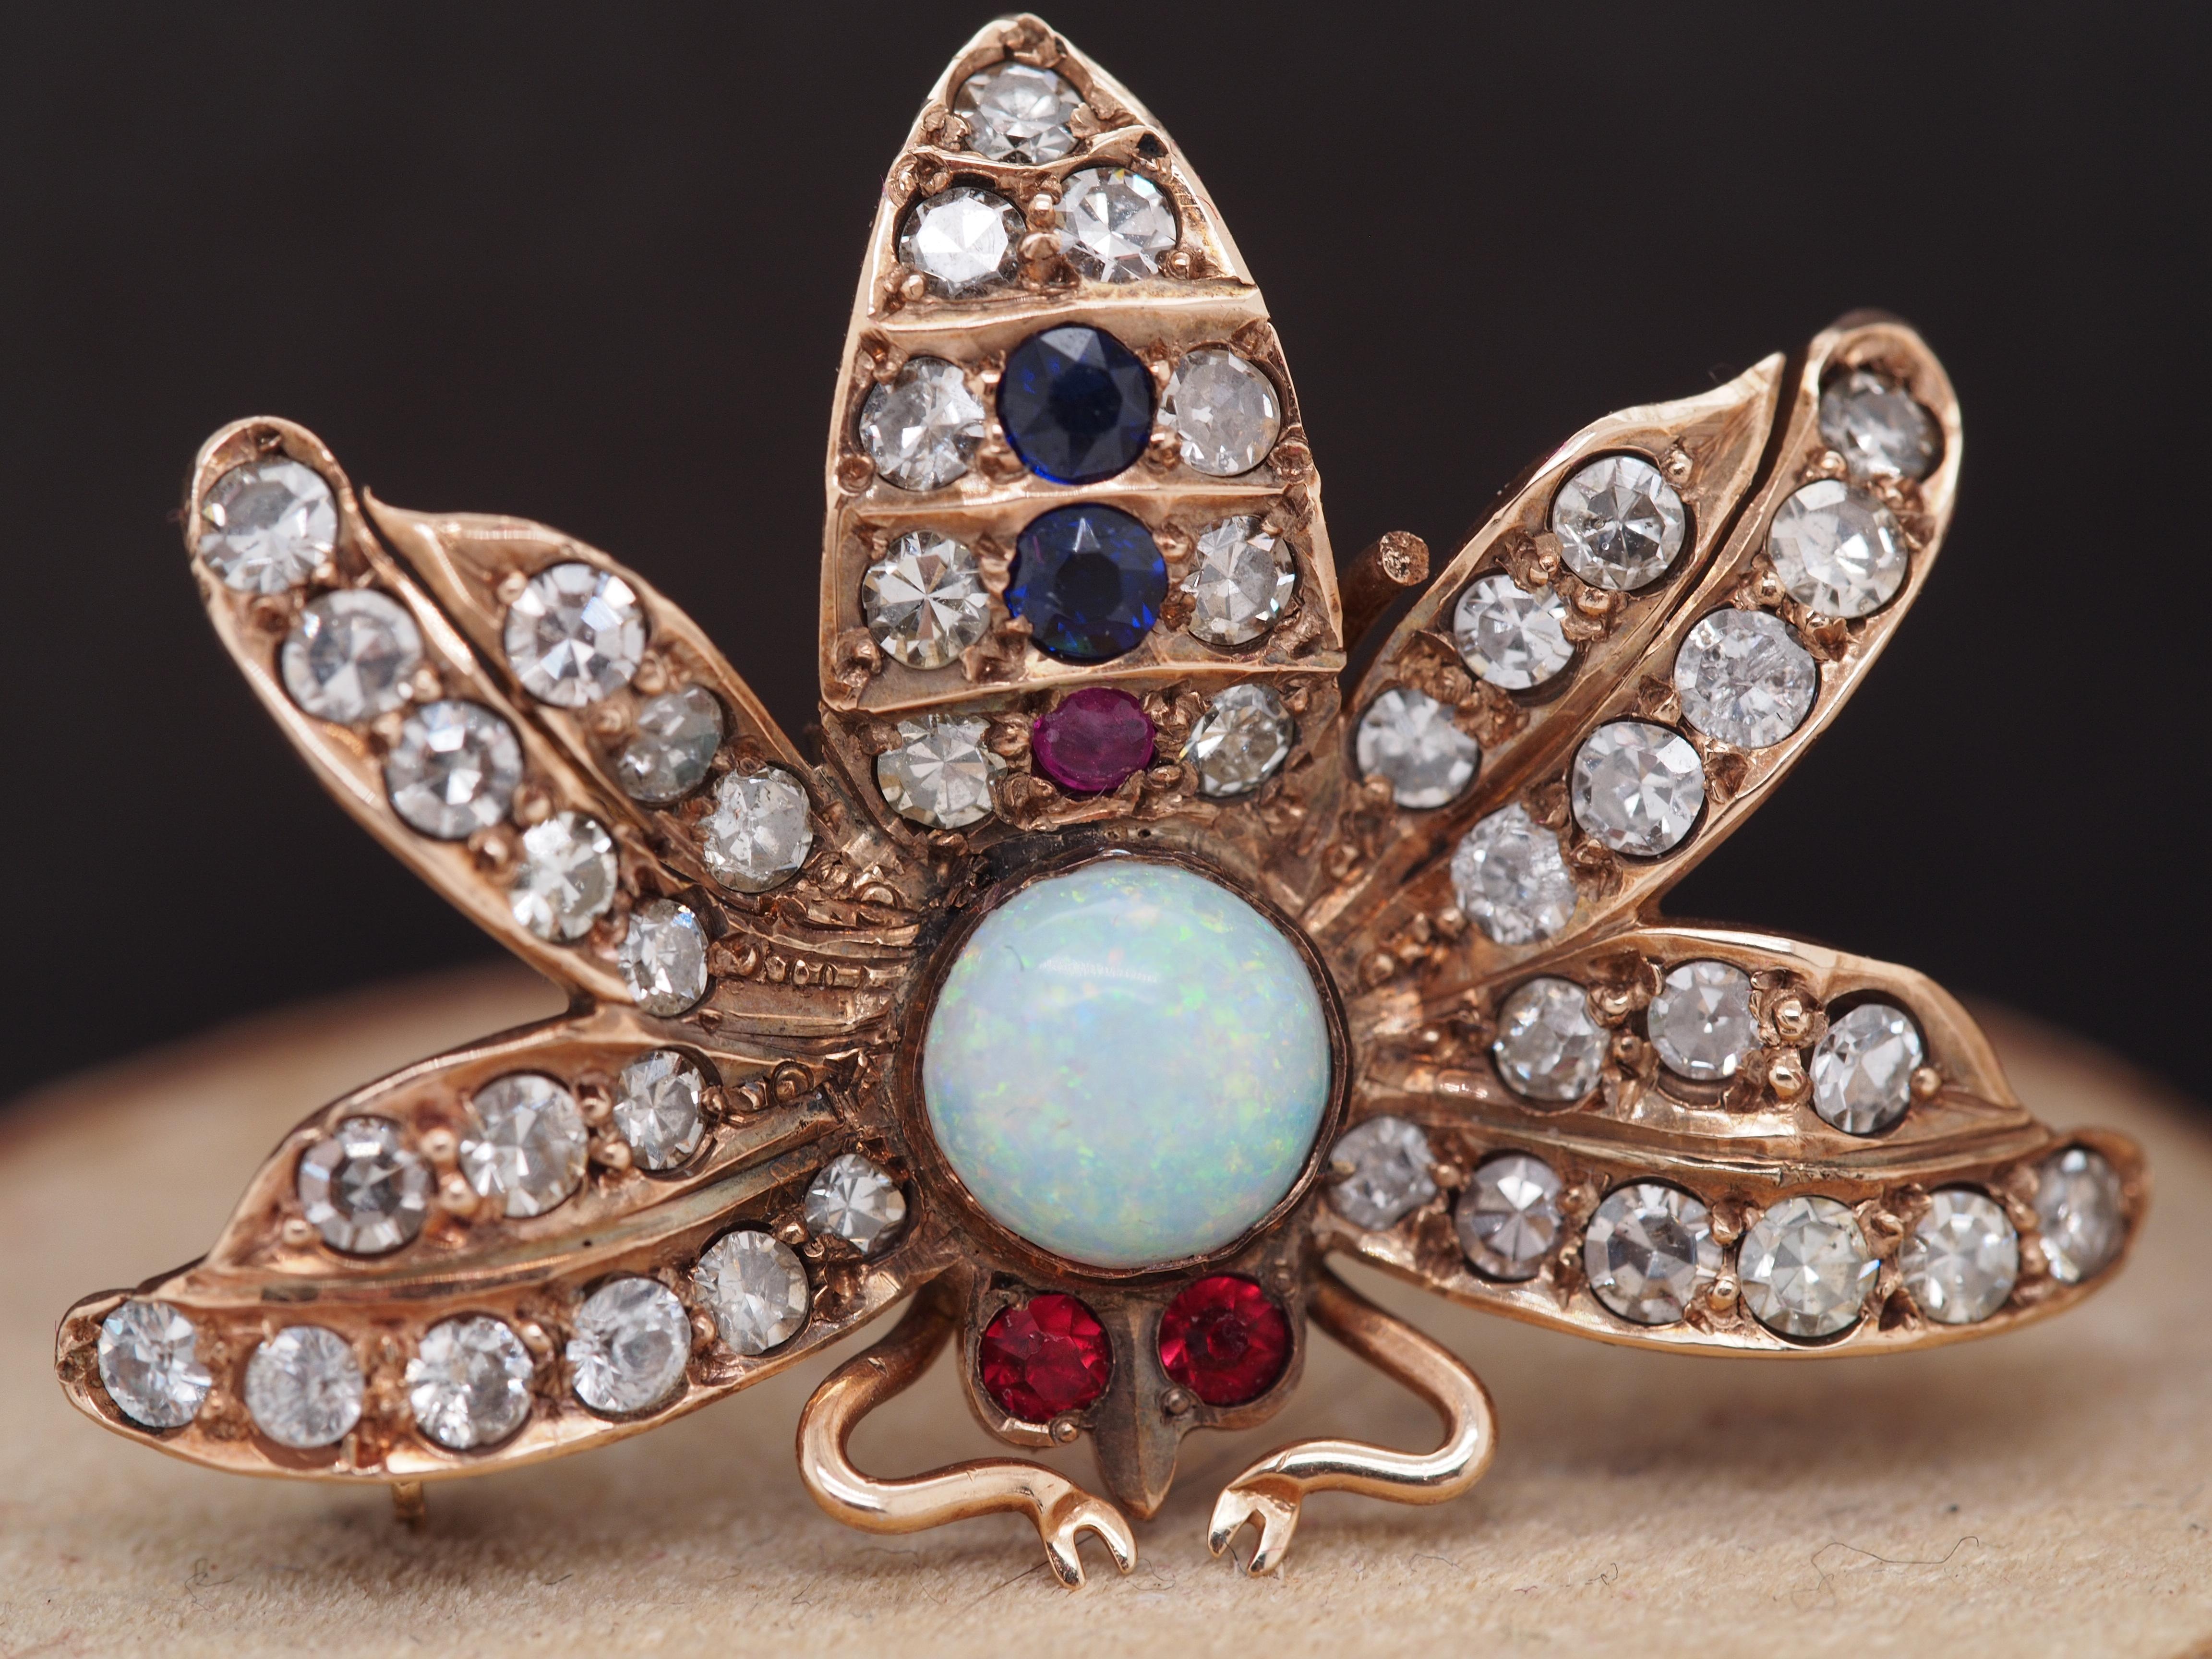 Edwardian Circa 1900s 14K Yellow Gold Opal, Diamond, Sapphire and Ruby Butterfly Brooch For Sale